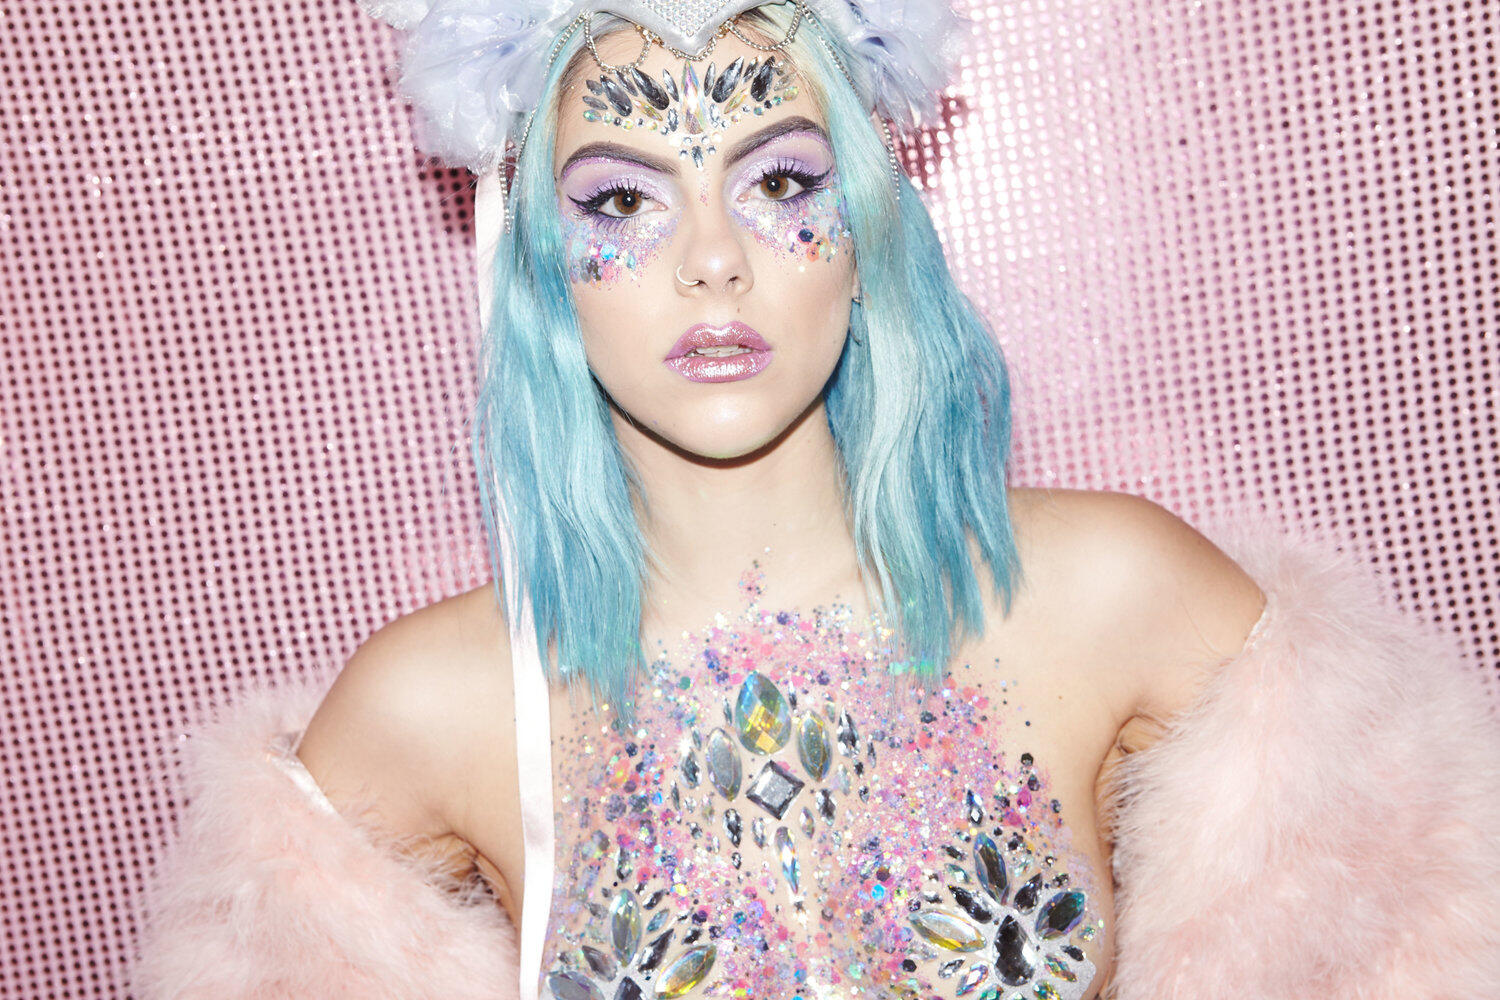 An image of blogger Sophie Hannah Richardson showing us her festival makeup with chunky glitter